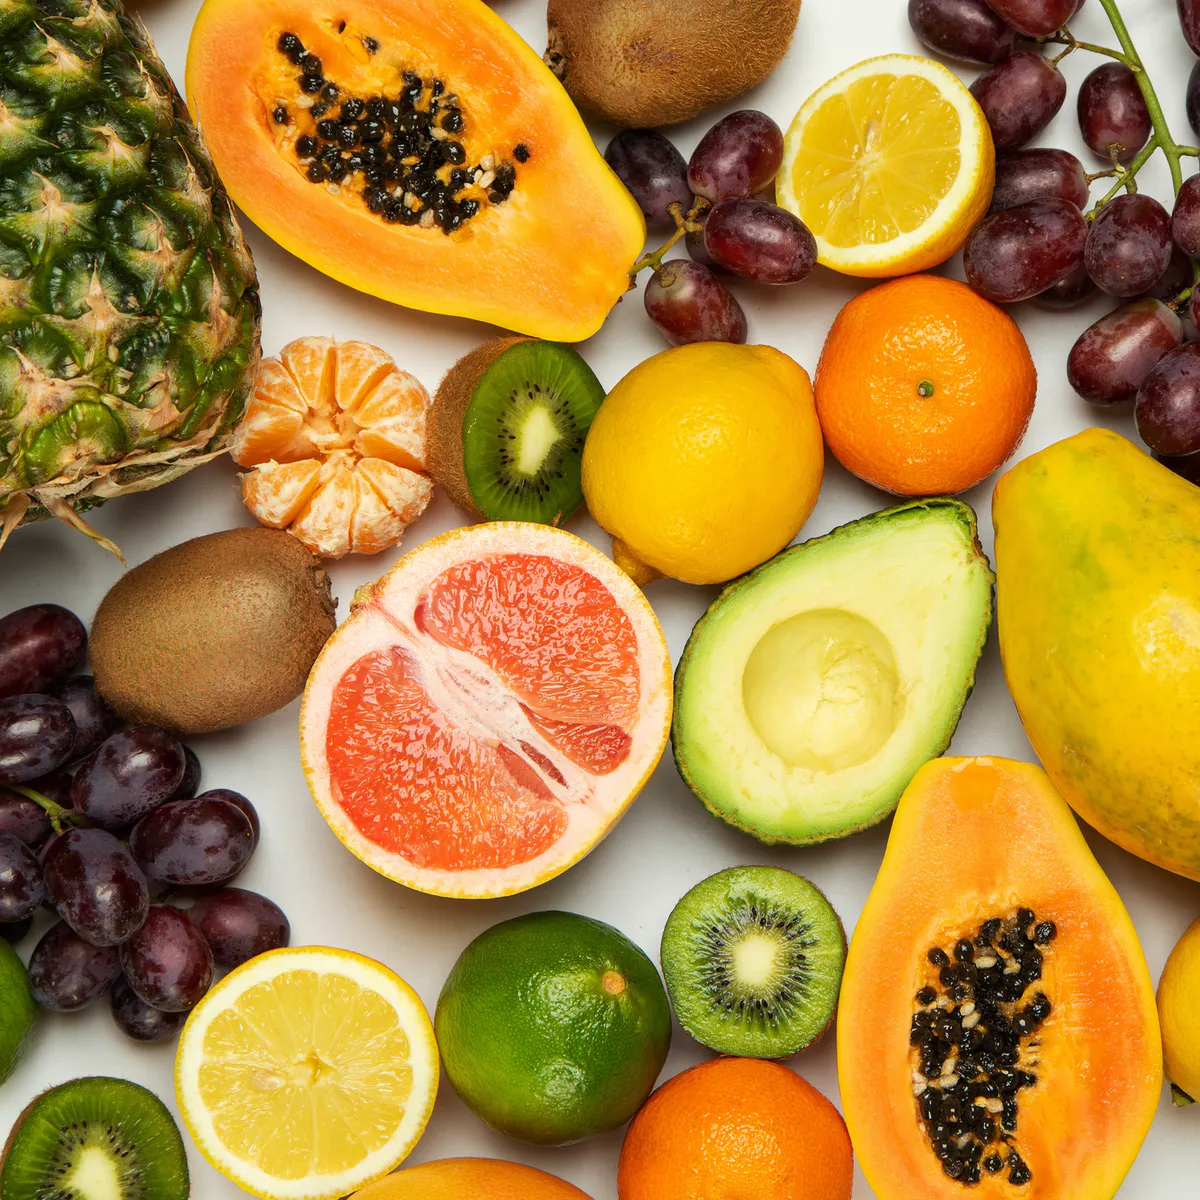 Does Fruit-Only Diet Help Detoxify, Weight Loss And Overall Holistic Health?